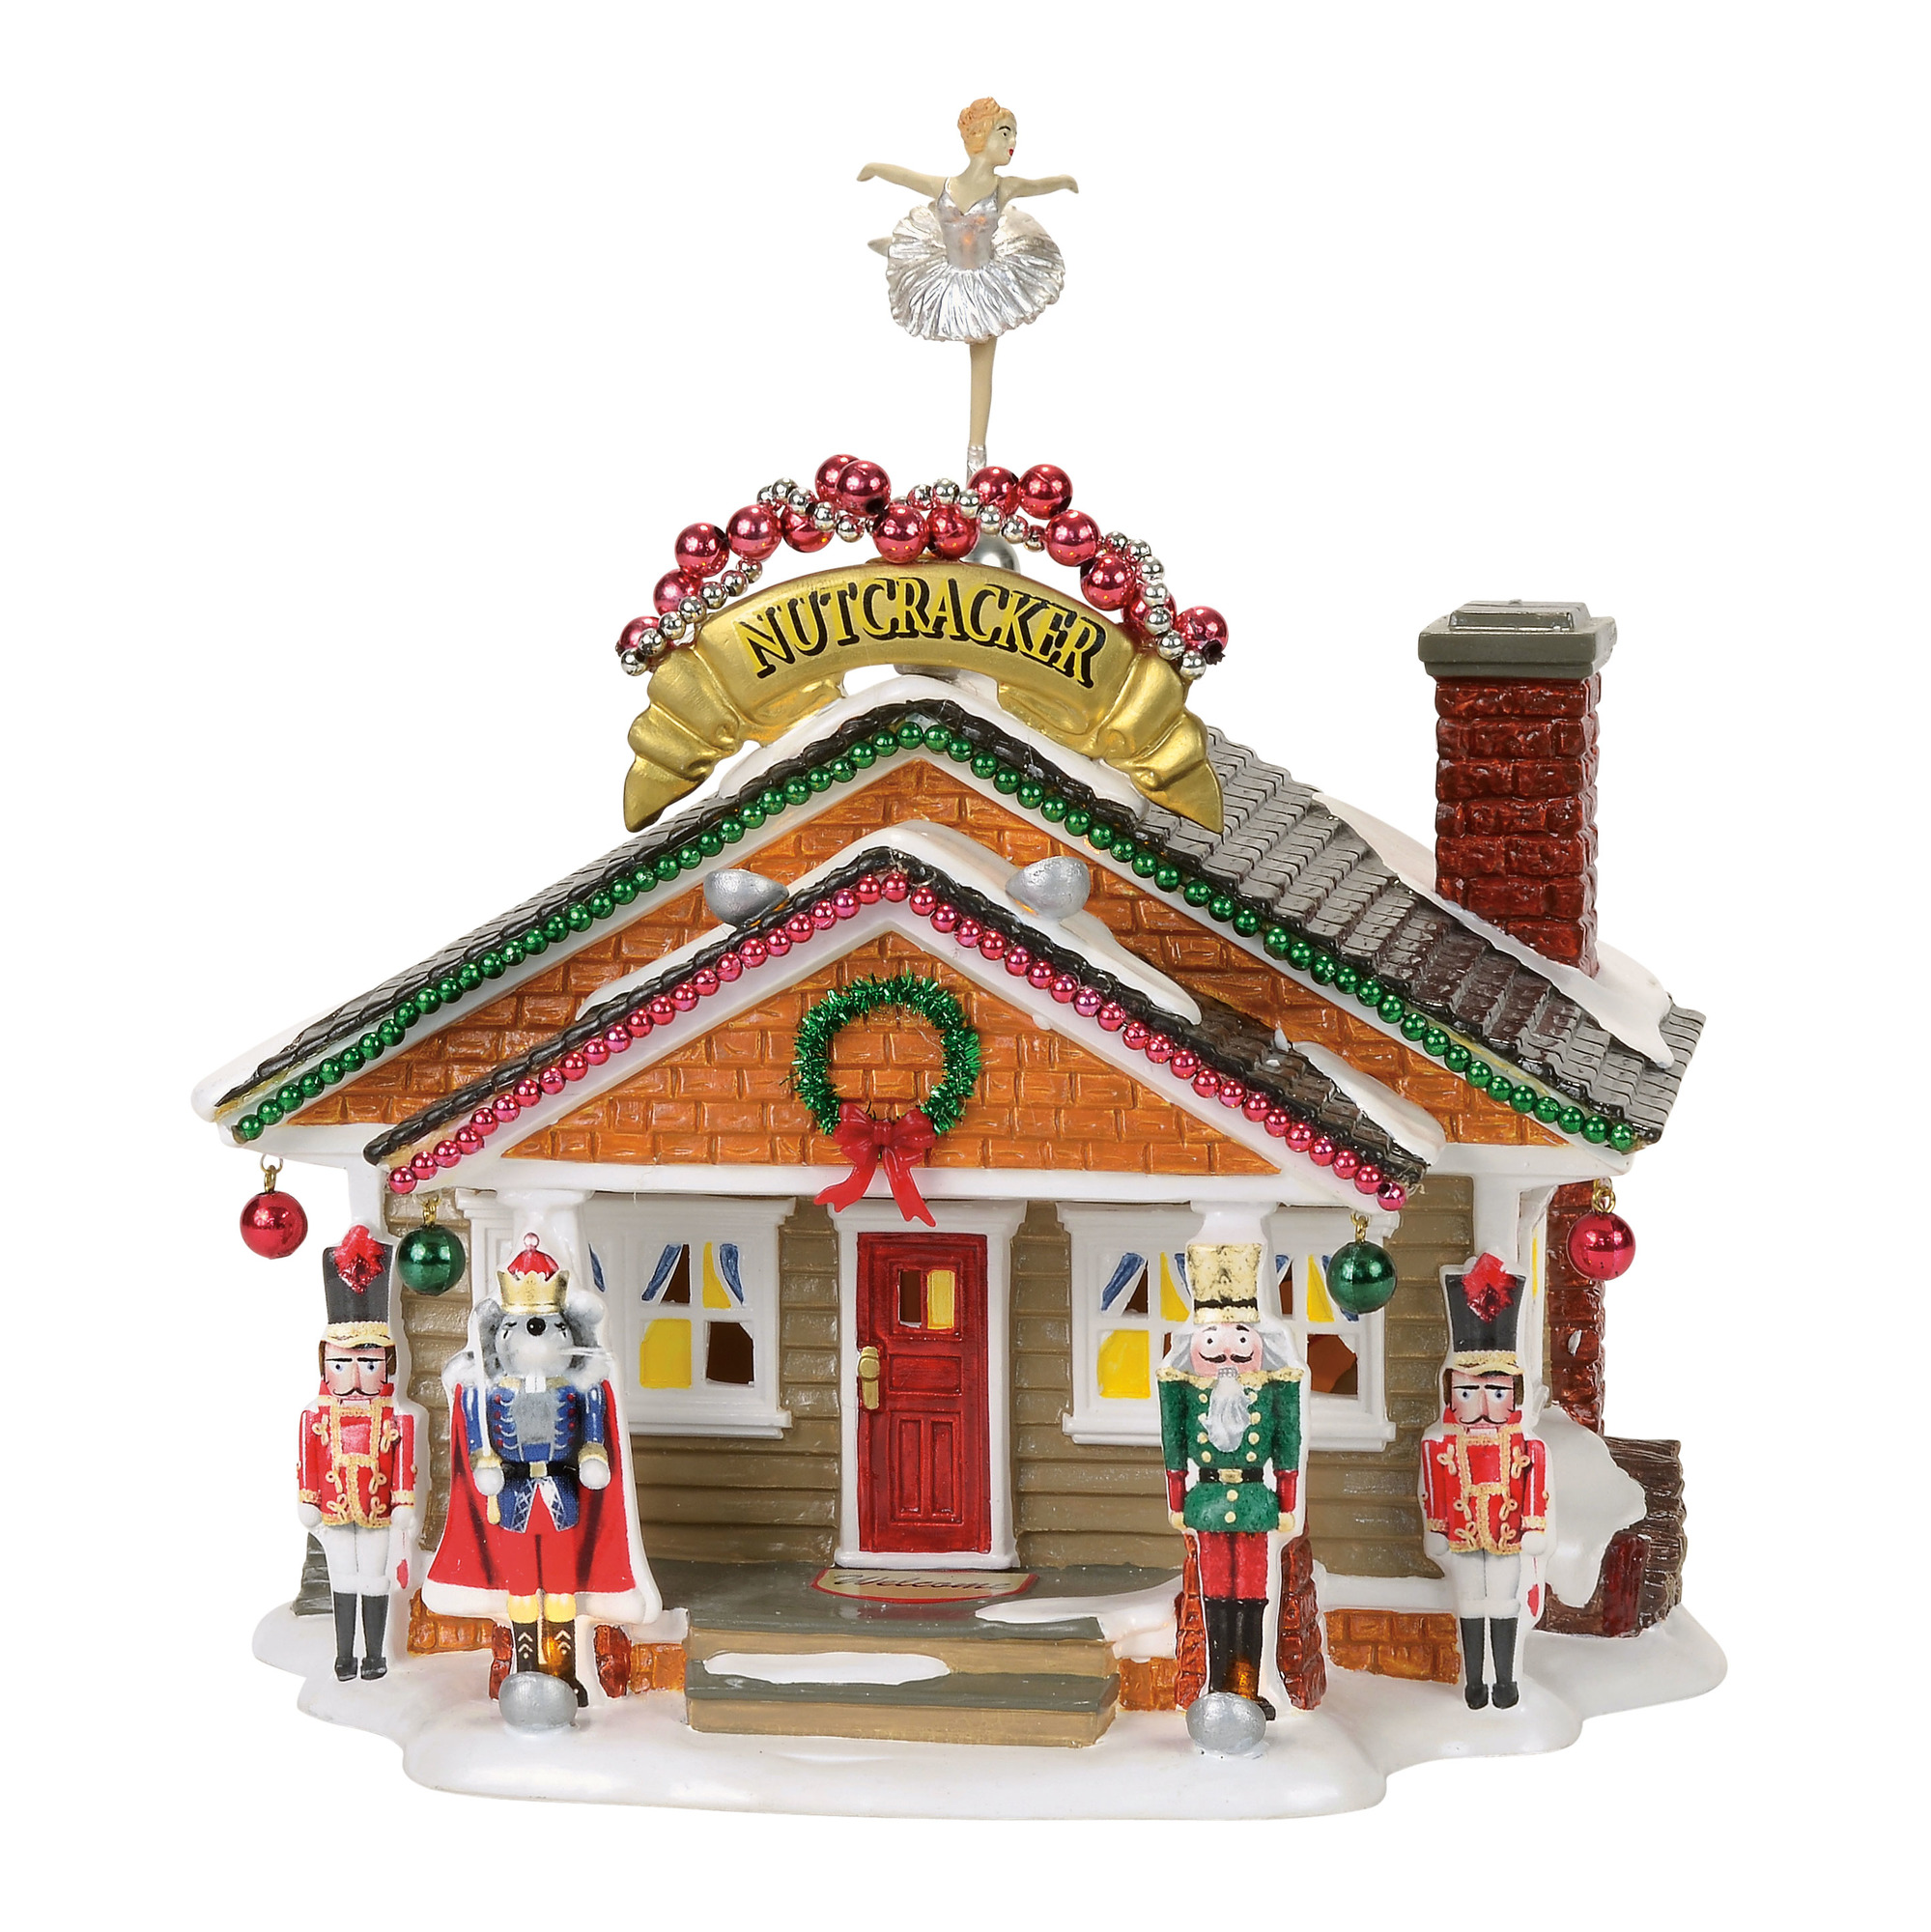 The Nutcracker House by Department 56 by Rich Mar Florist